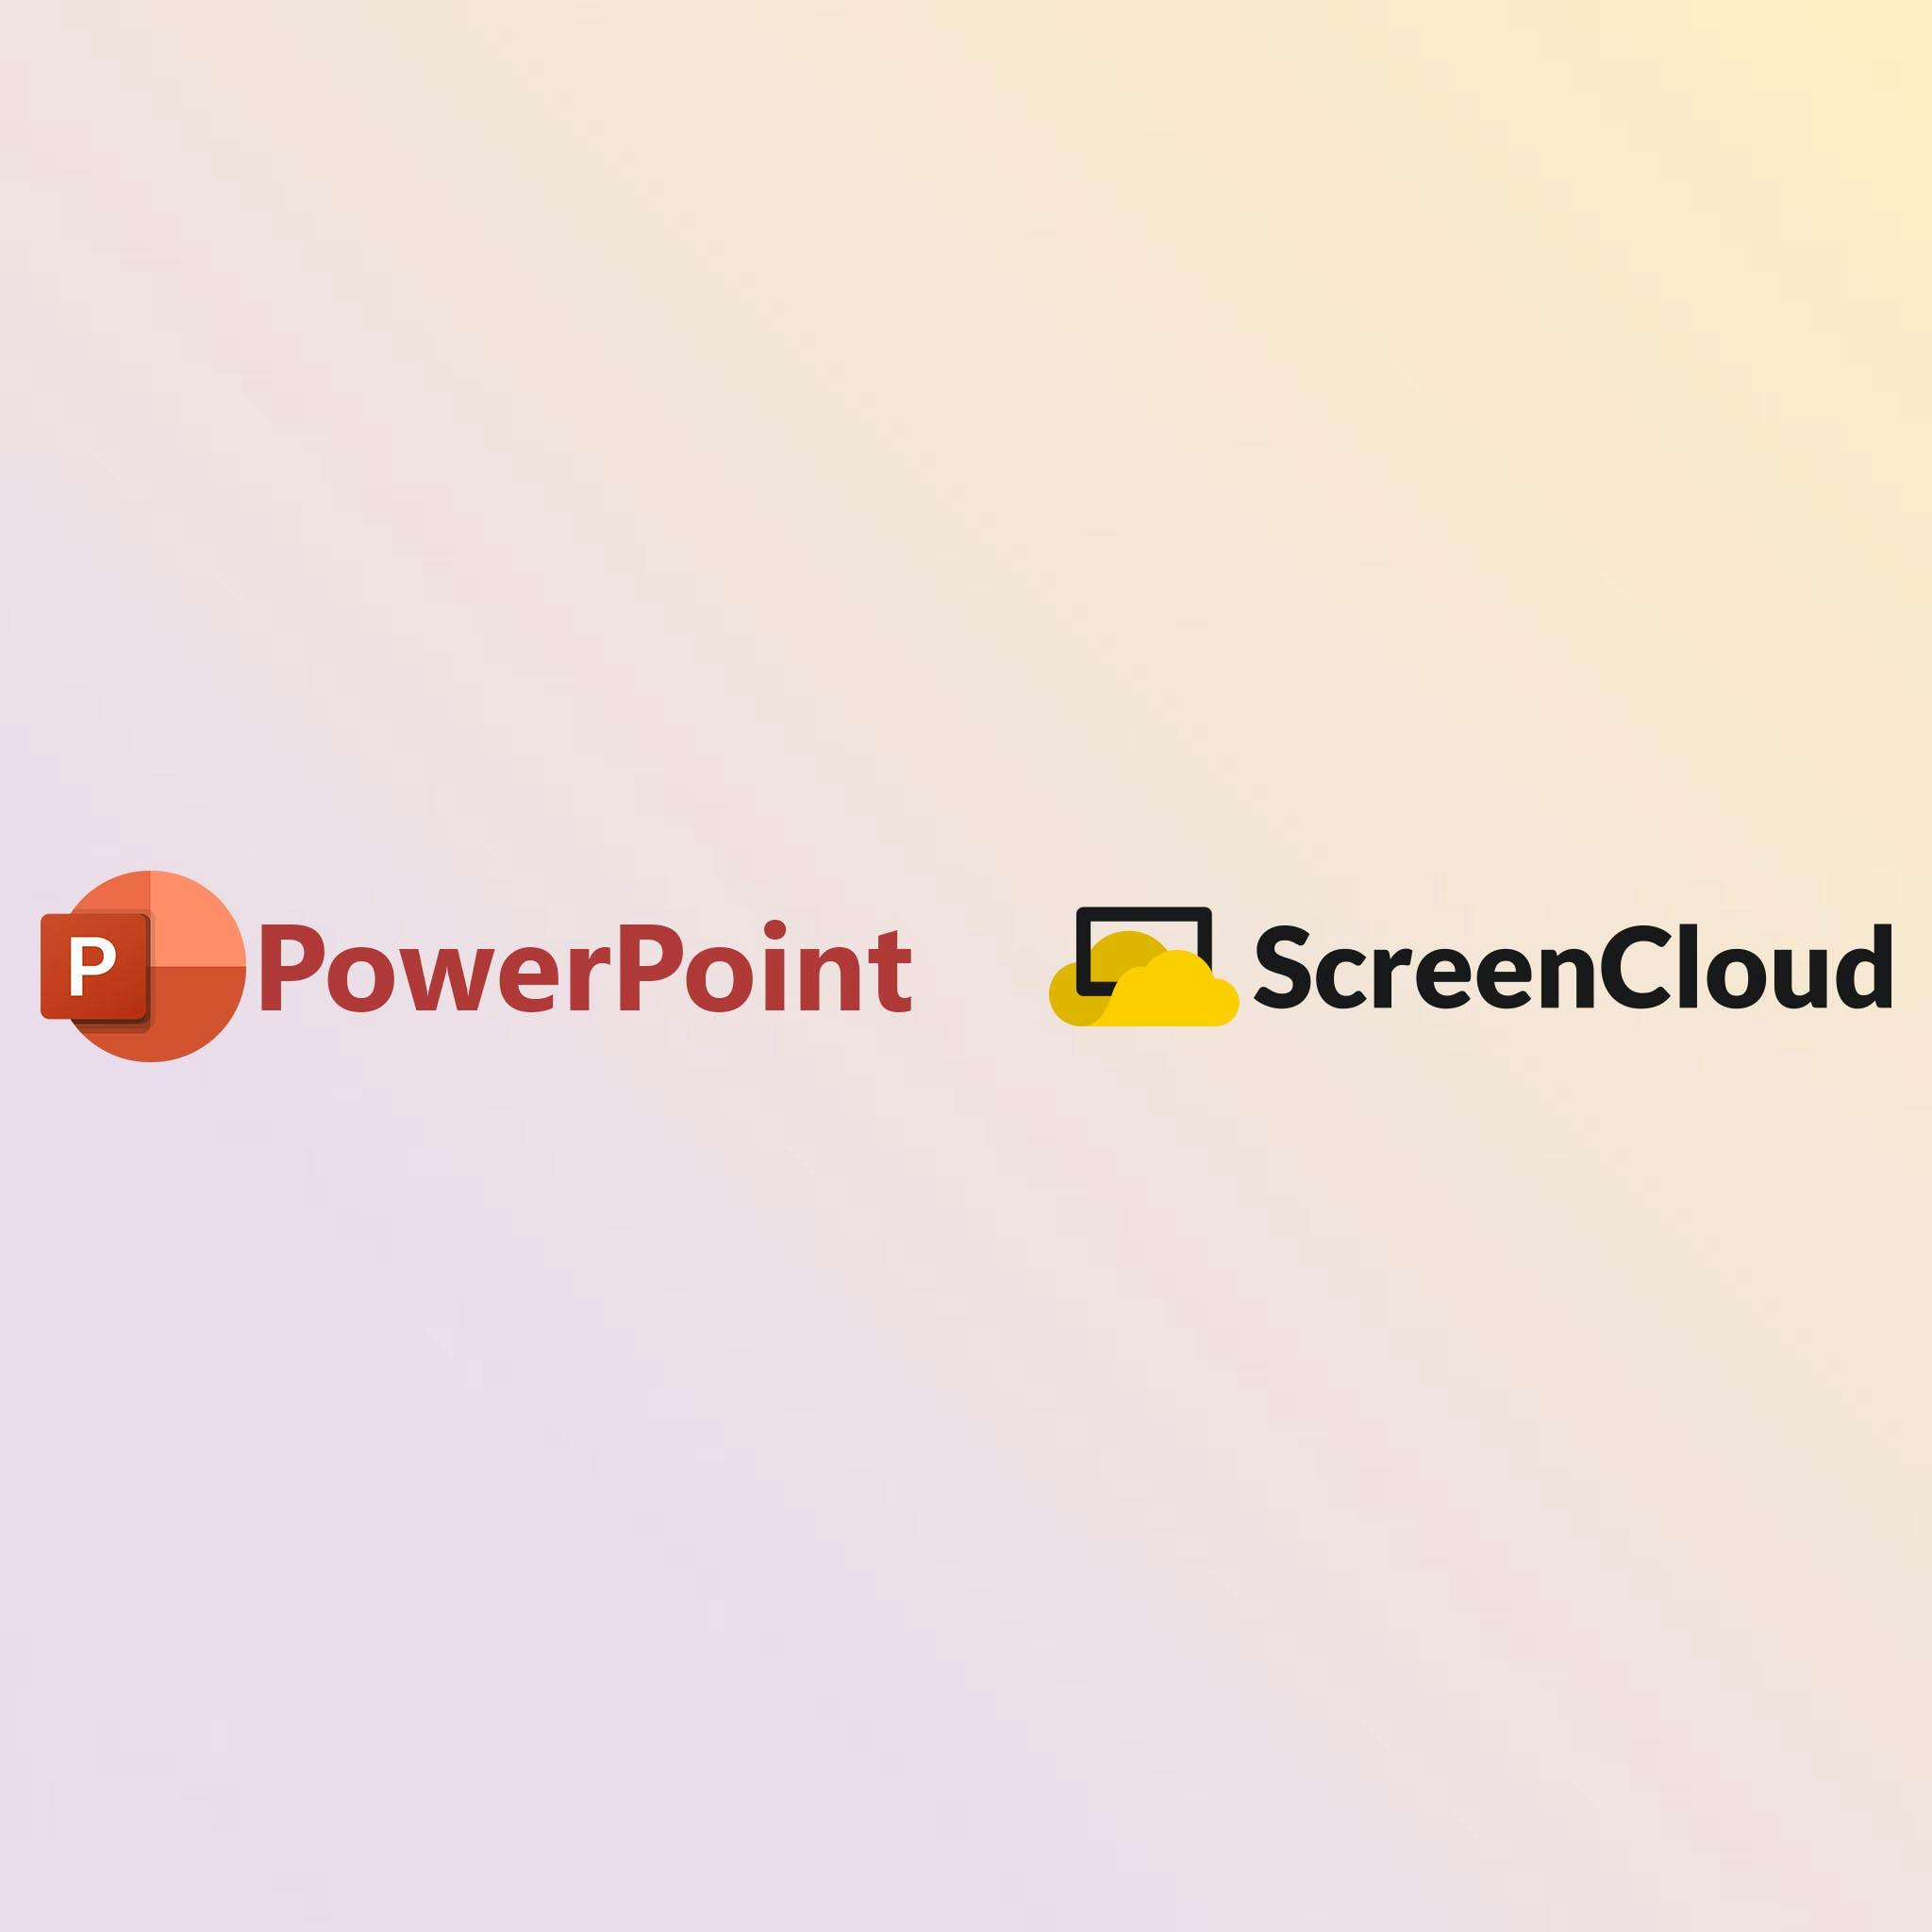 ScreenCloud Article - PowerPoint for Digital Signage: How to Share Slides on a TV